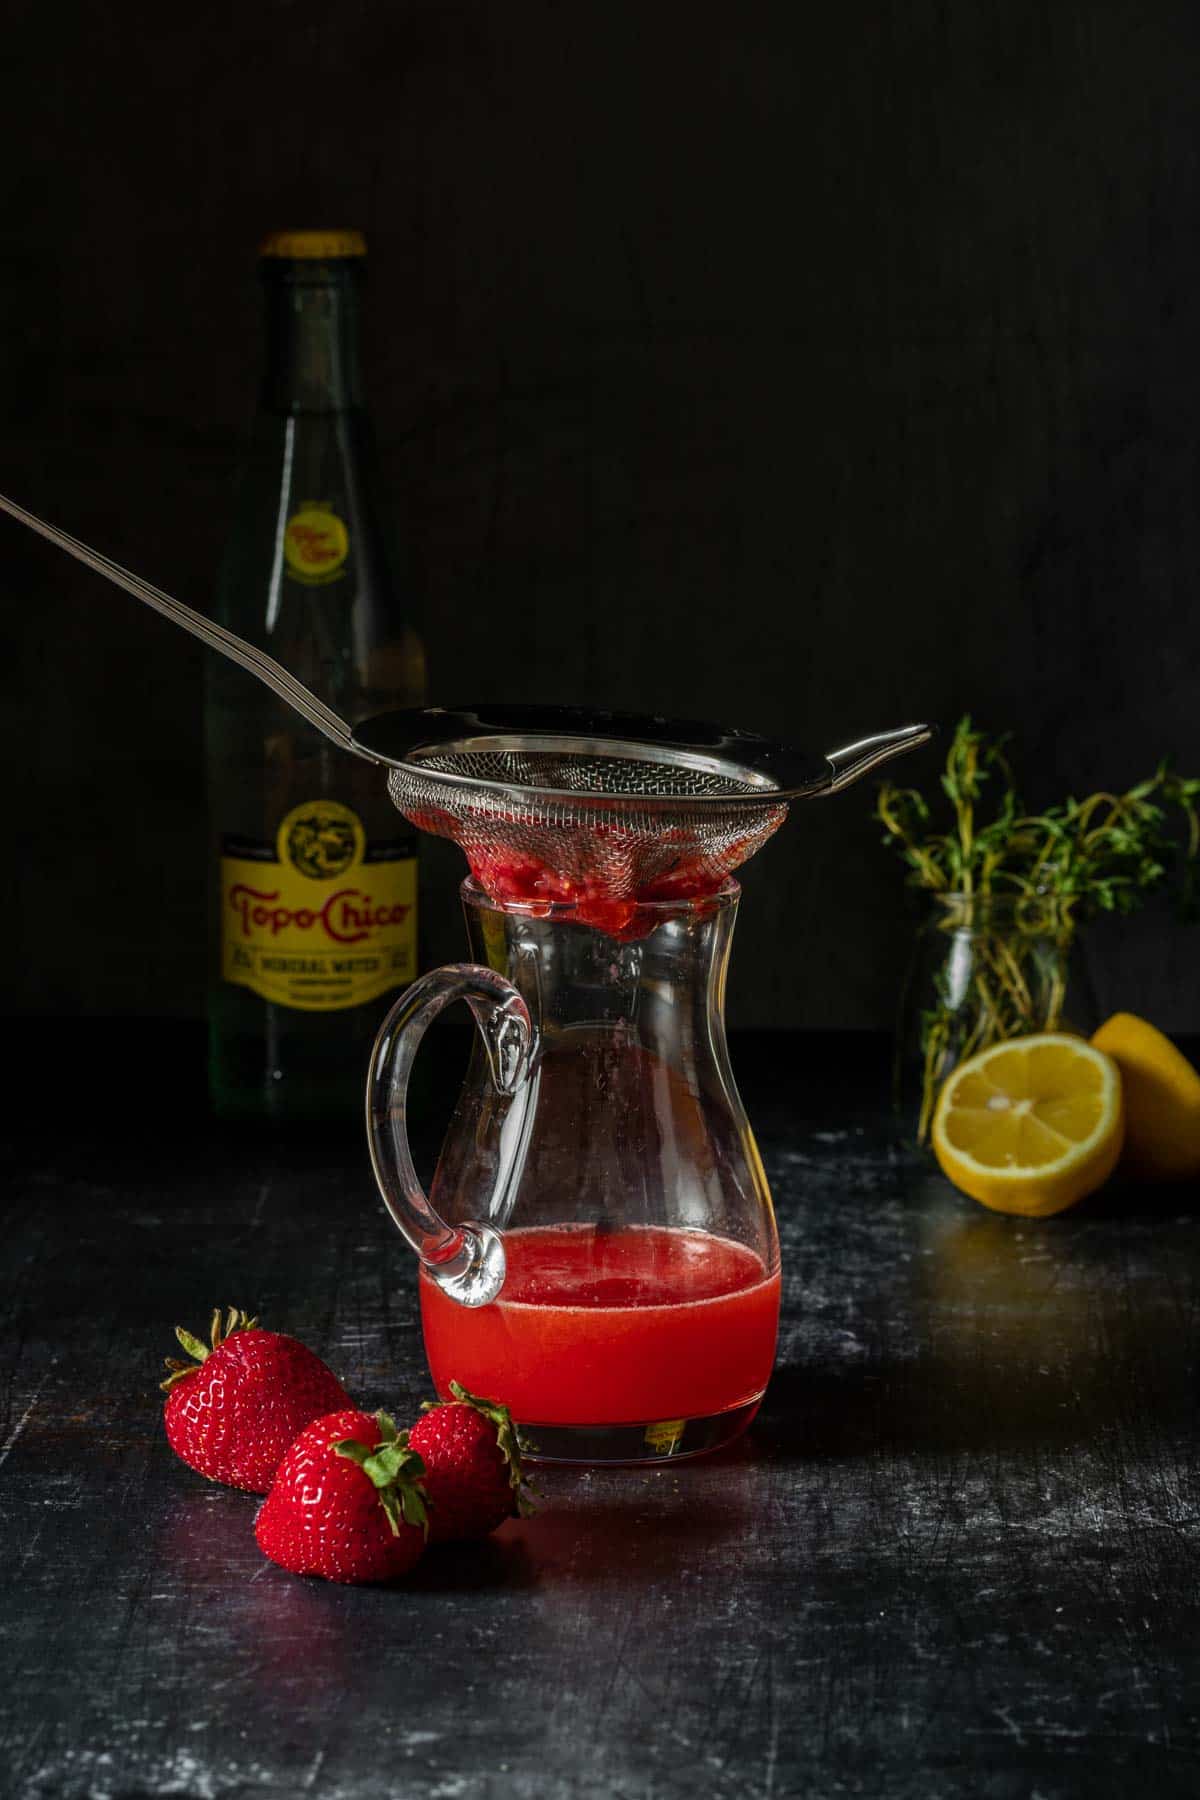 A strainer with mashed strawberries over a small glass pitcher with red juice.